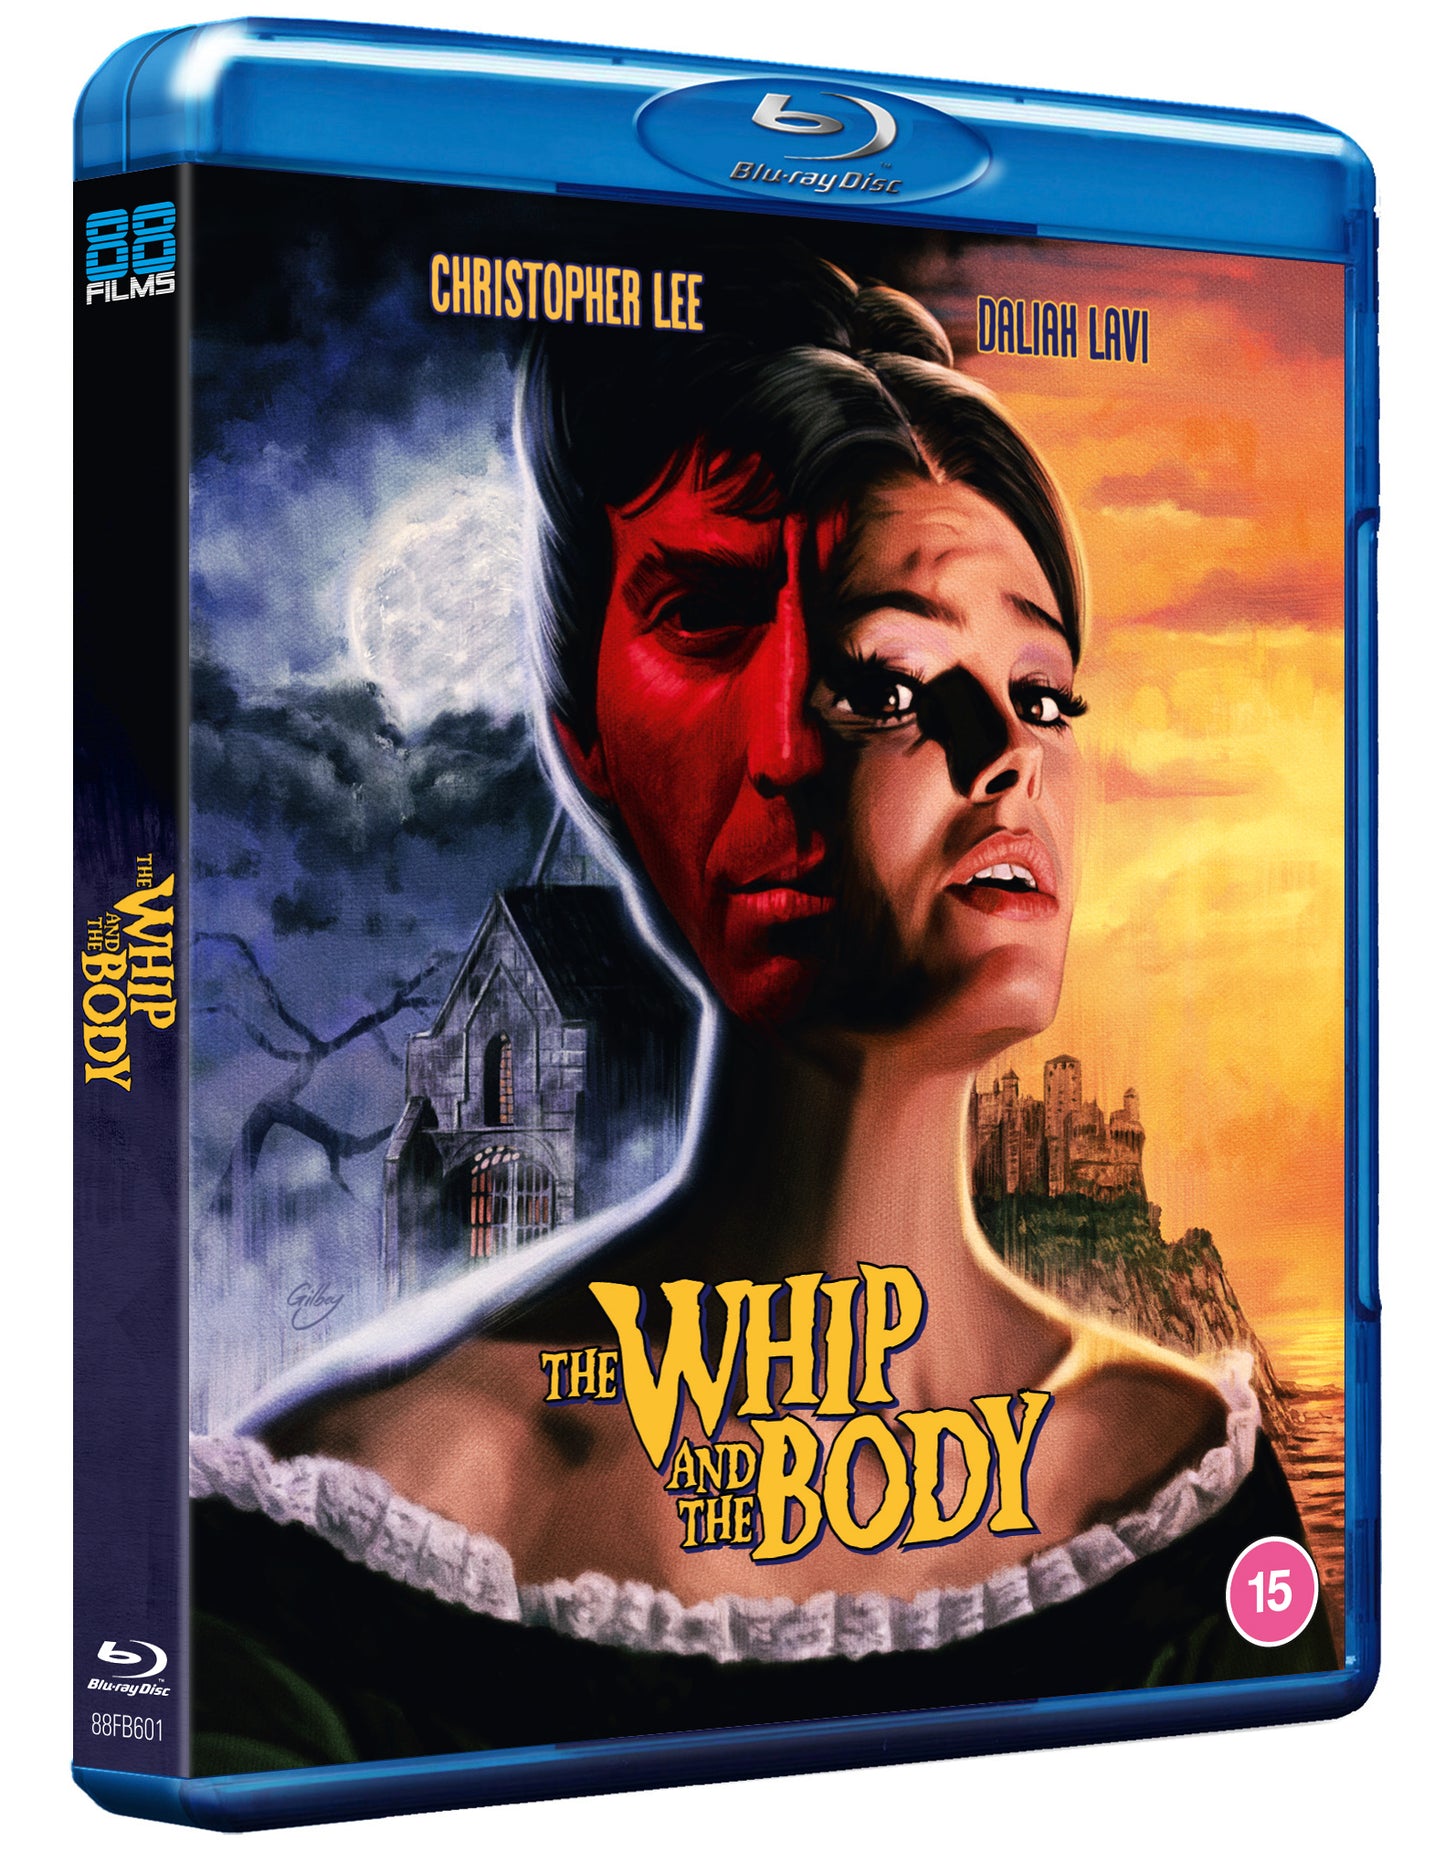 The Whip and the Body - The Italian Collection 80